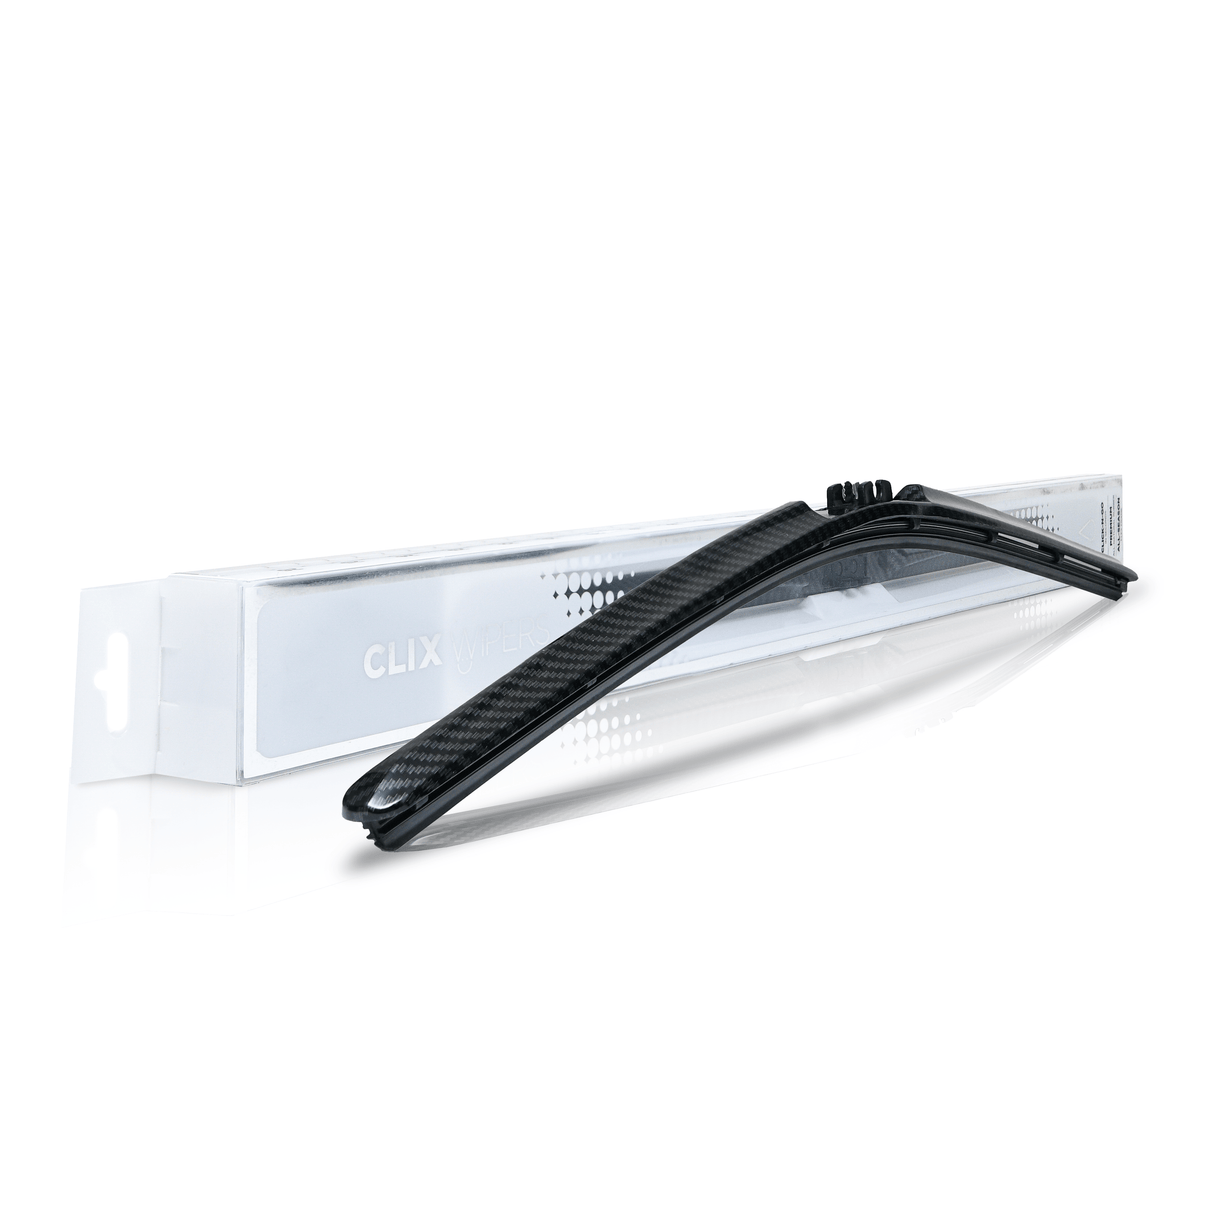 22" Clix Wipers INK Wiper Blades - ClixAuto